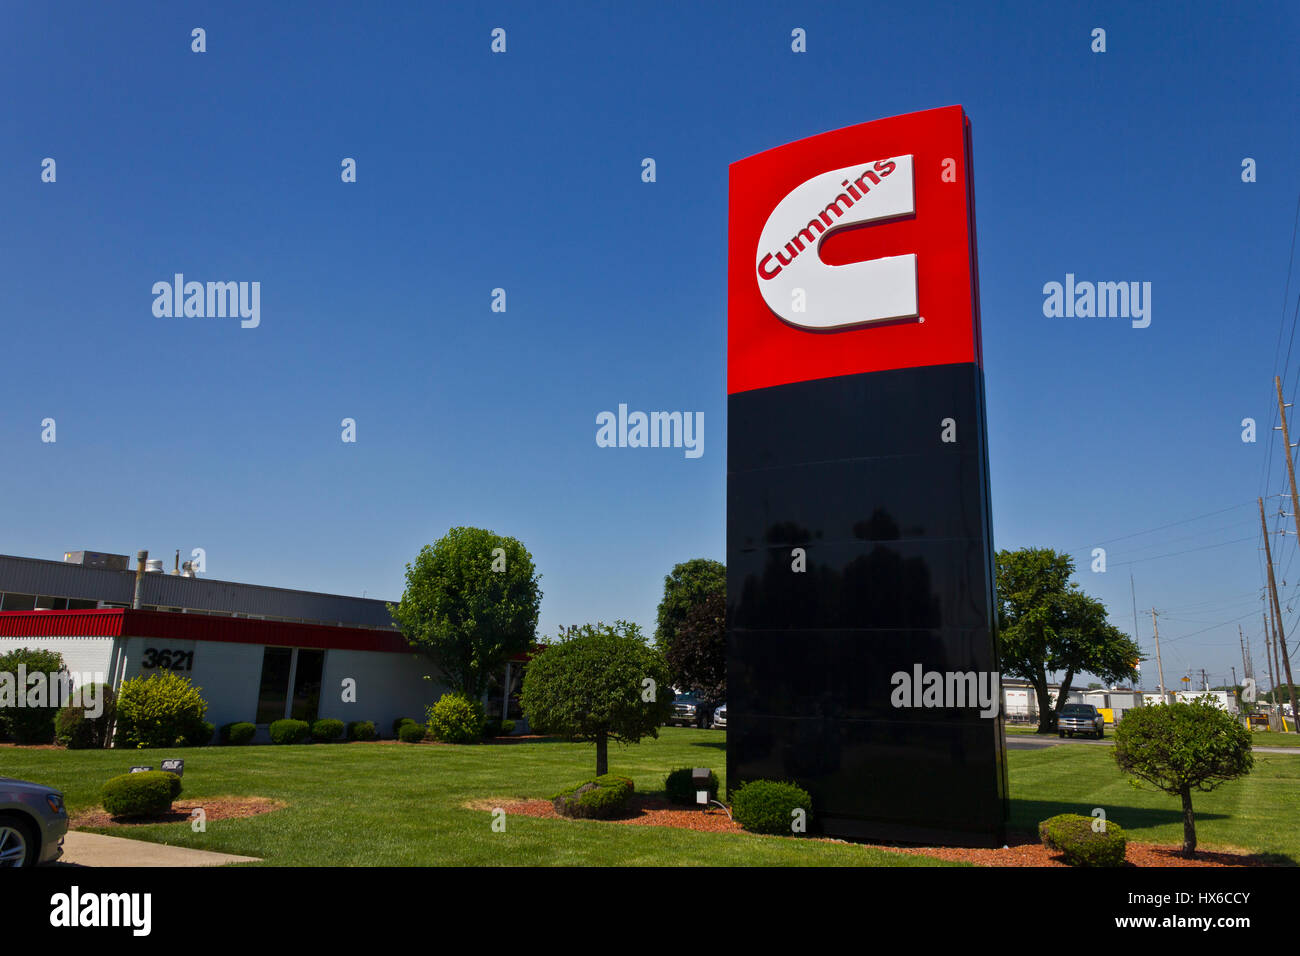 Indianapolis - Circa June 2016: Cummins Inc. is a Manufacturer of Engines and Power Generation Equipment I Stock Photo